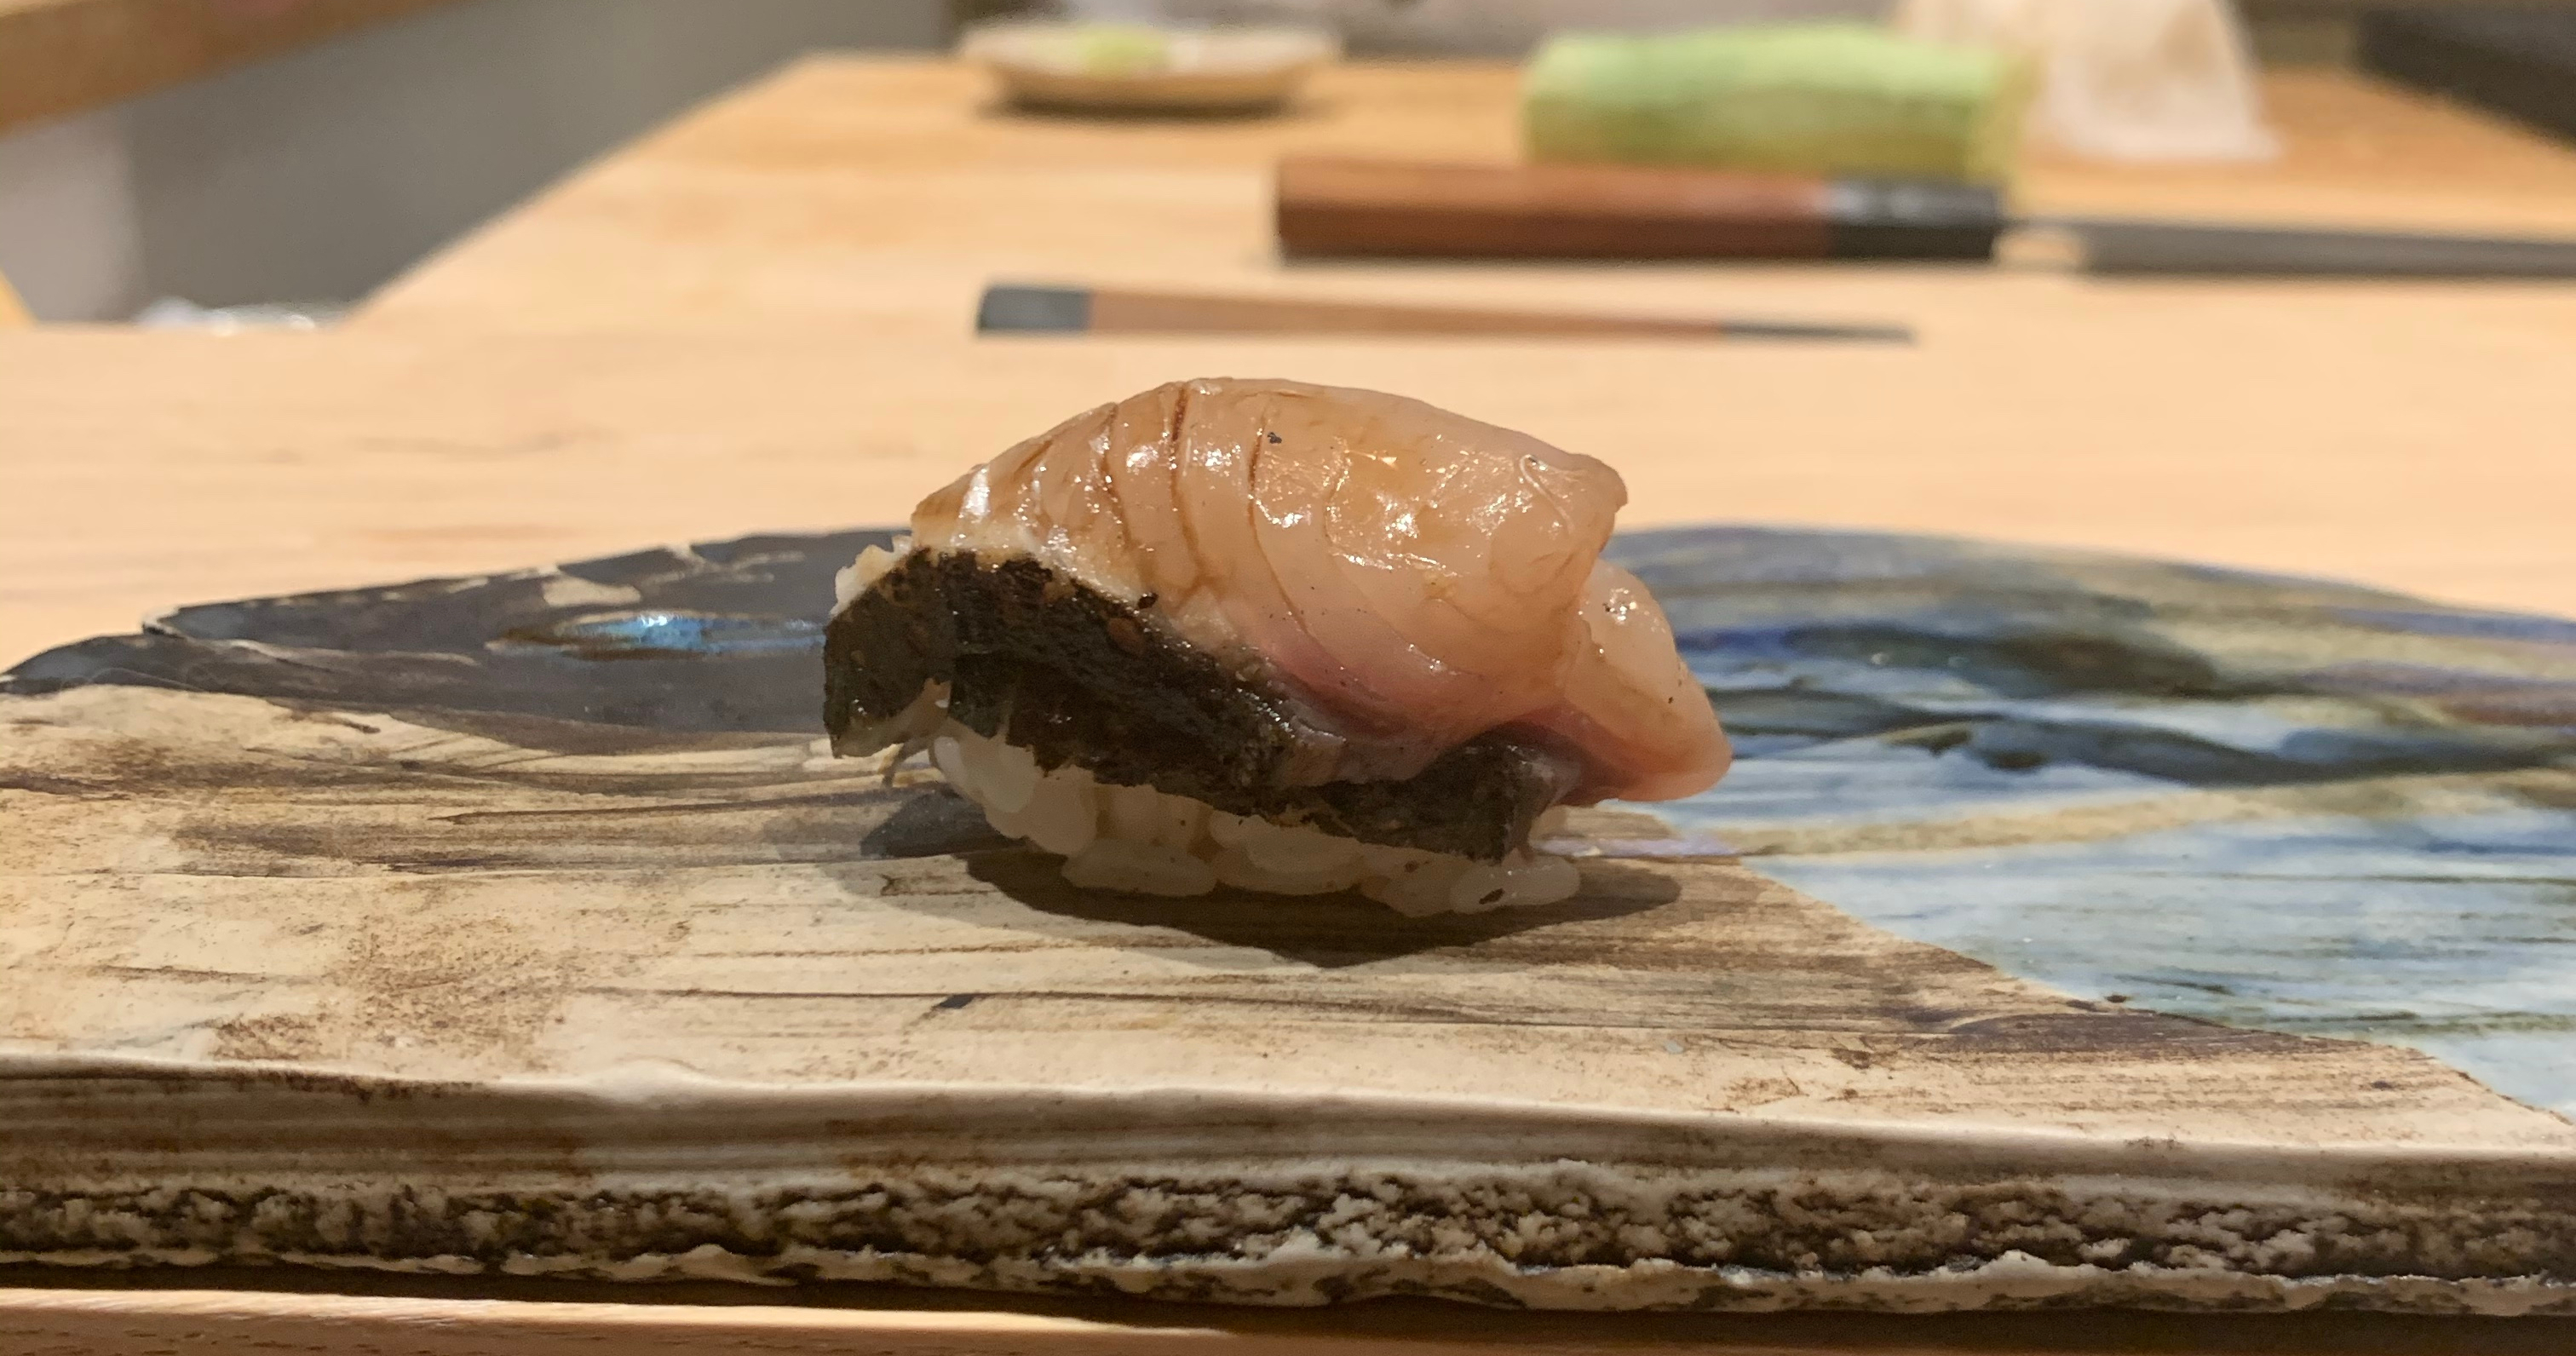 One piece of nigiri sushi with a piece of fish on top. The fish has a band of skin along the bottom. The top of the fish is pink and has been brushed with a soy sauce glaze.